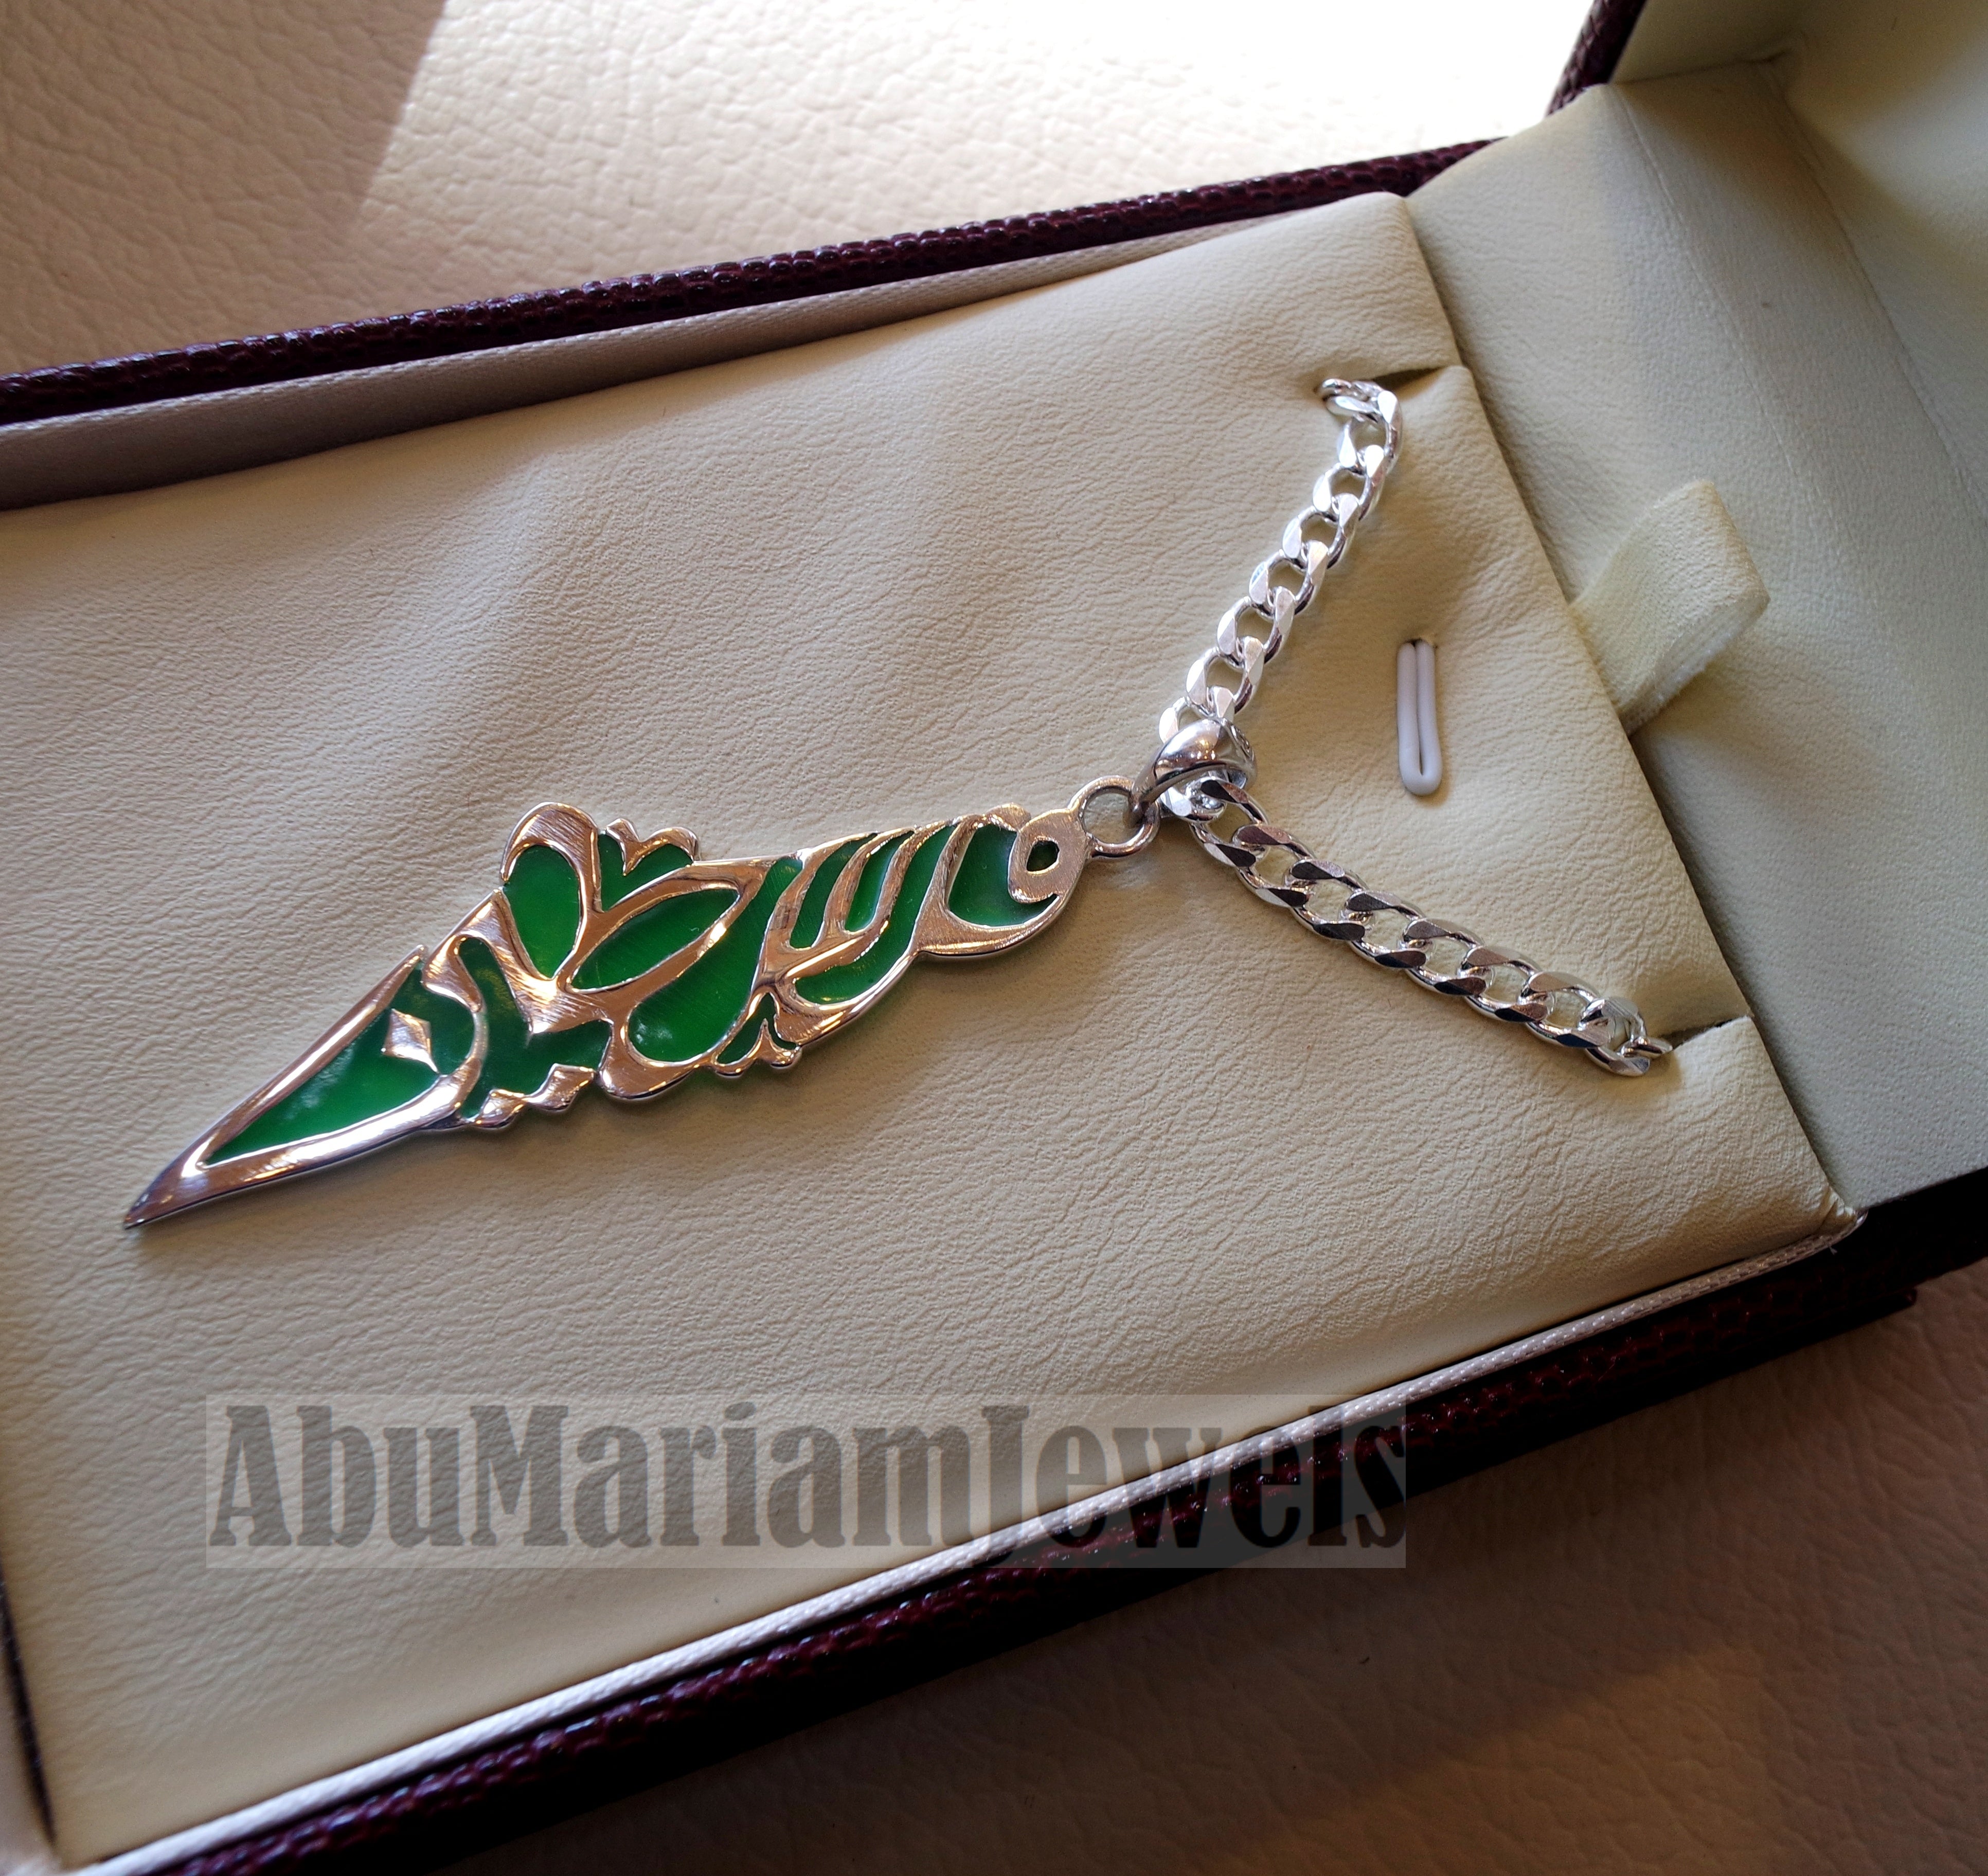 Palestine map pendant sterling silver 925 with thick heavy chain  high quality with green enamel jewelry arabic calligraphy fast shipping خارطه فلسطين